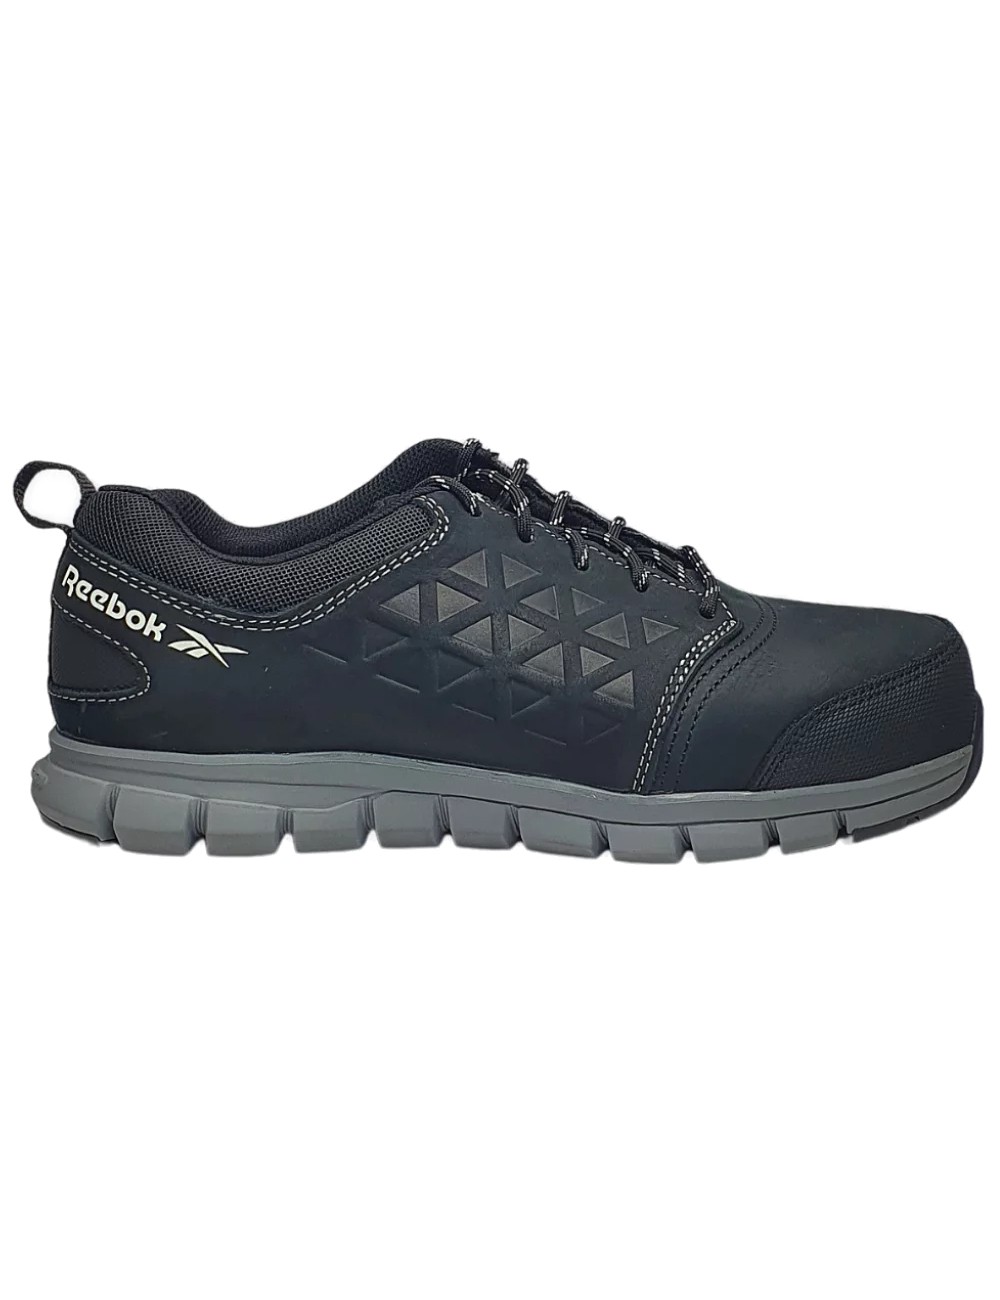 Reebok Excel Oxford S3 safety shoes